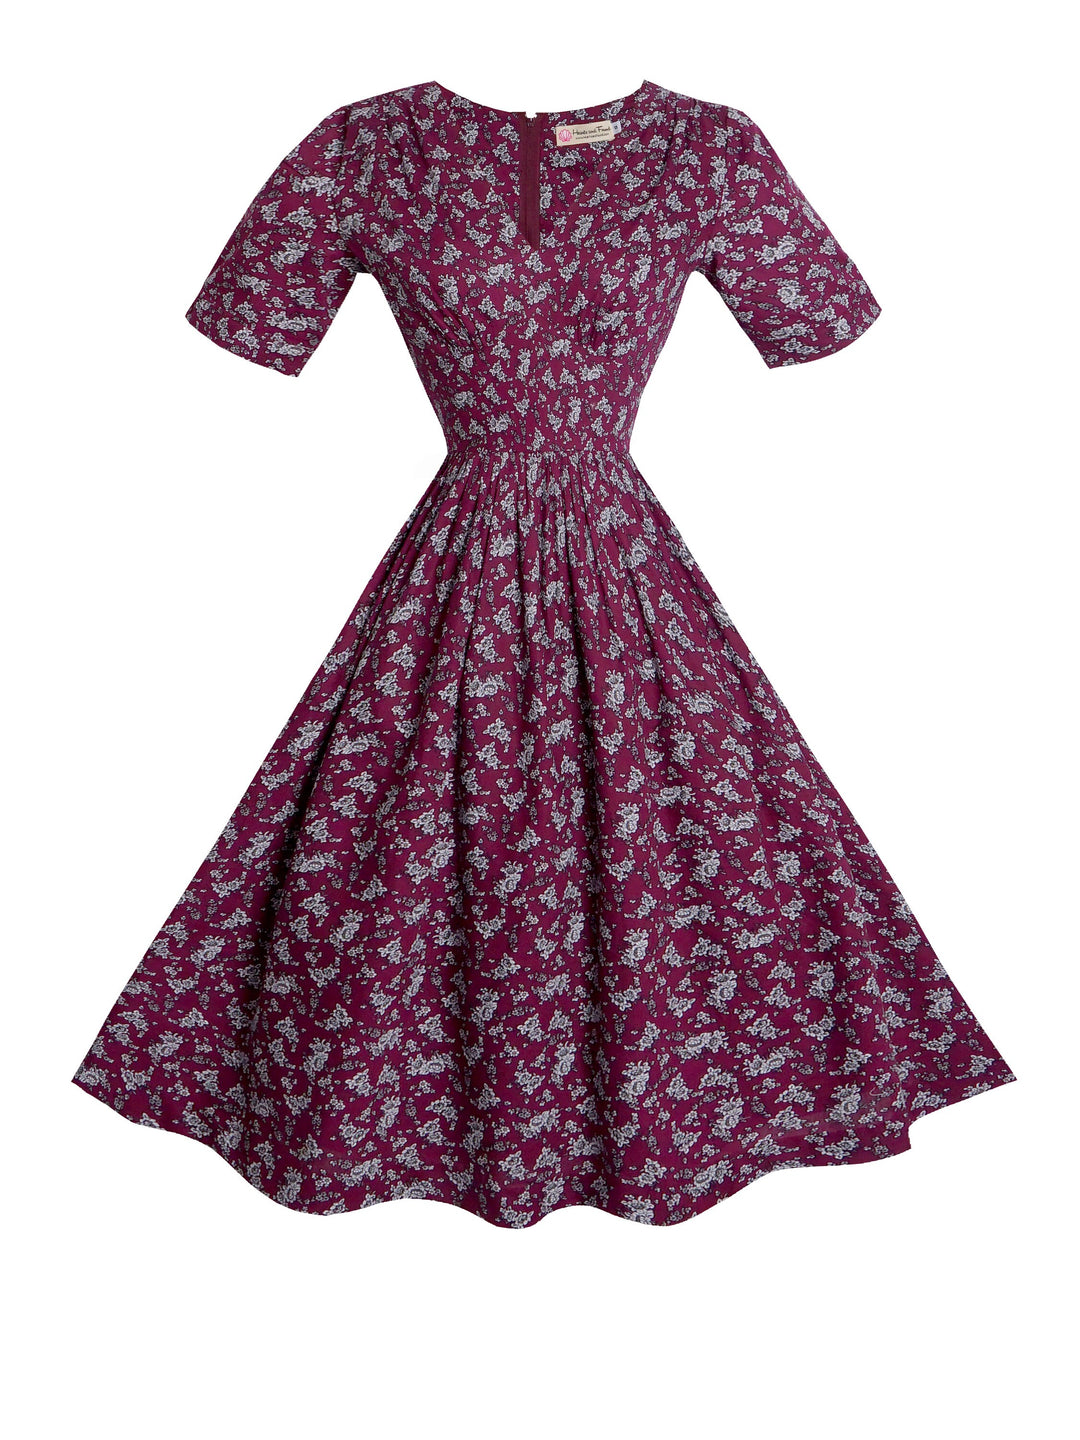 RTS - Size S - Sherry Dress Burgundy "Wisteria Blooms”